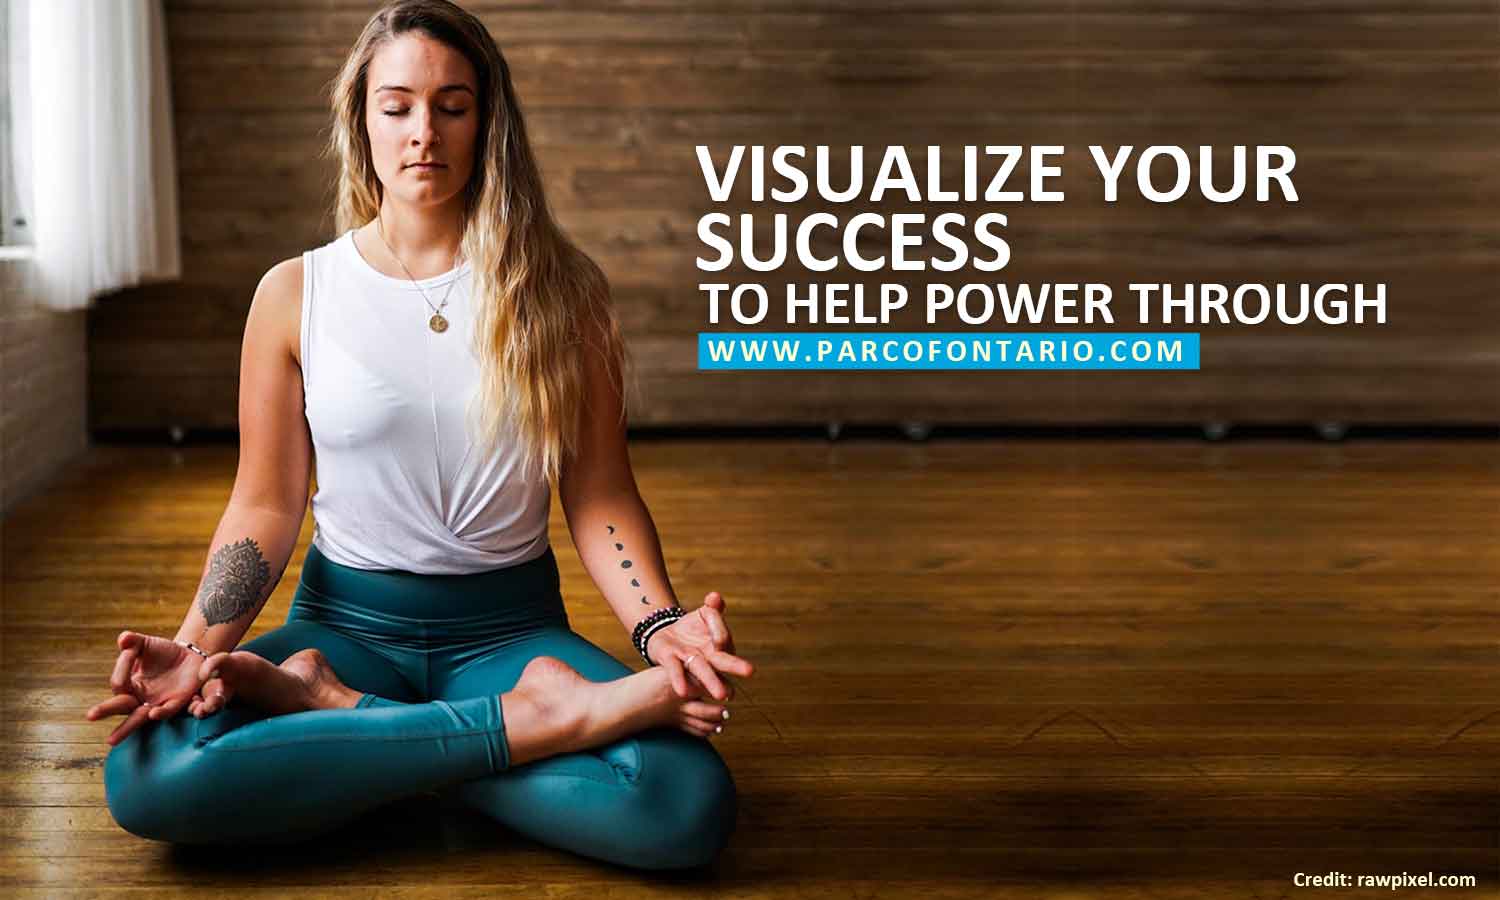 Visualize your success to help power through